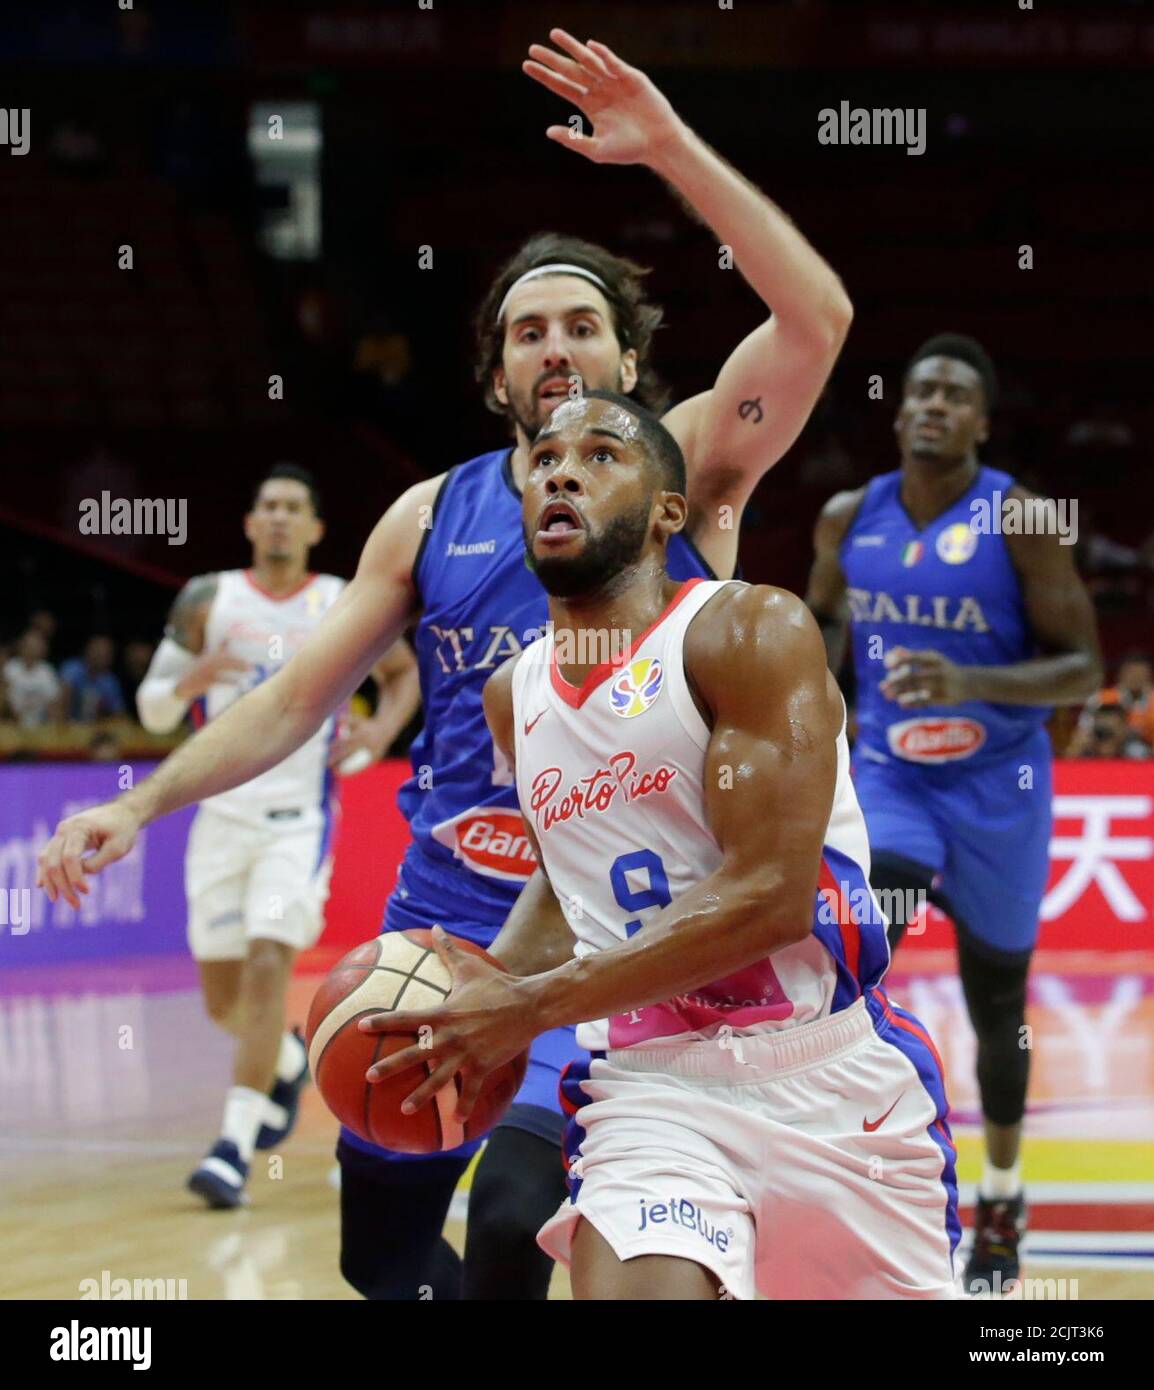 Basketball - FIBA World Cup - Second Round - Group J - Puerto Rico v Italy  - Wuhan Sports Centre, Wuhan, China - September 8, 2019 Puerto Rico's Gary  Browne in action REUTERS/Jason Lee Stock Photo - Alamy